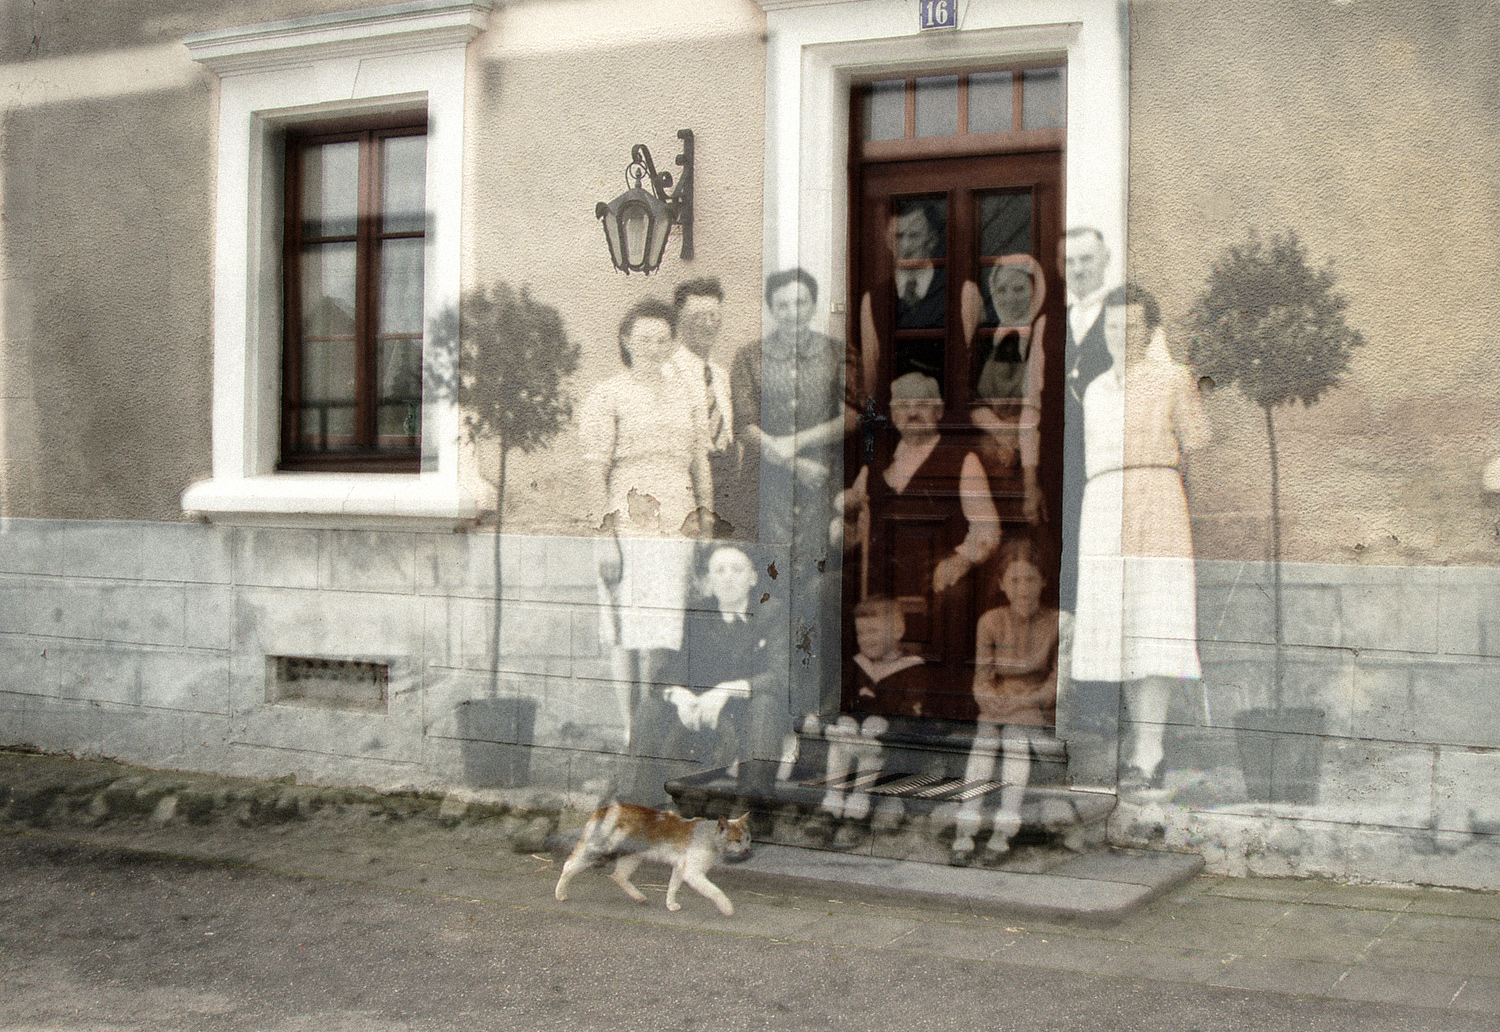 Anni-with-her-family-on-front-porch.jpg